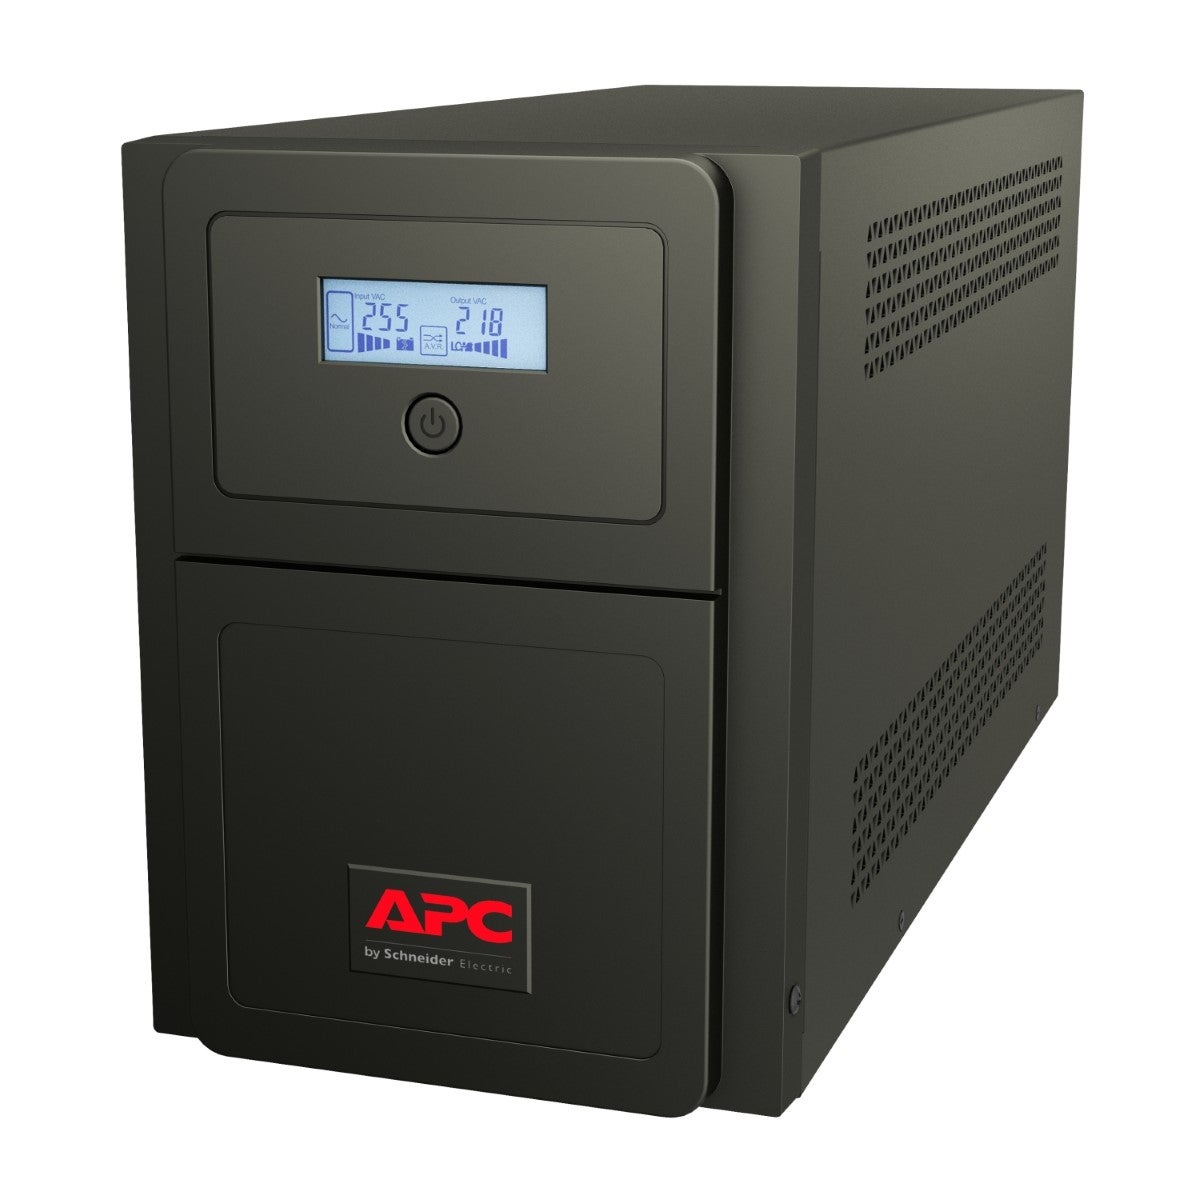 APC Easy UPS 1 Ph Line Interactive, 1000VA, Tower, 230V, 4 Universal outlets, AVR, LCD